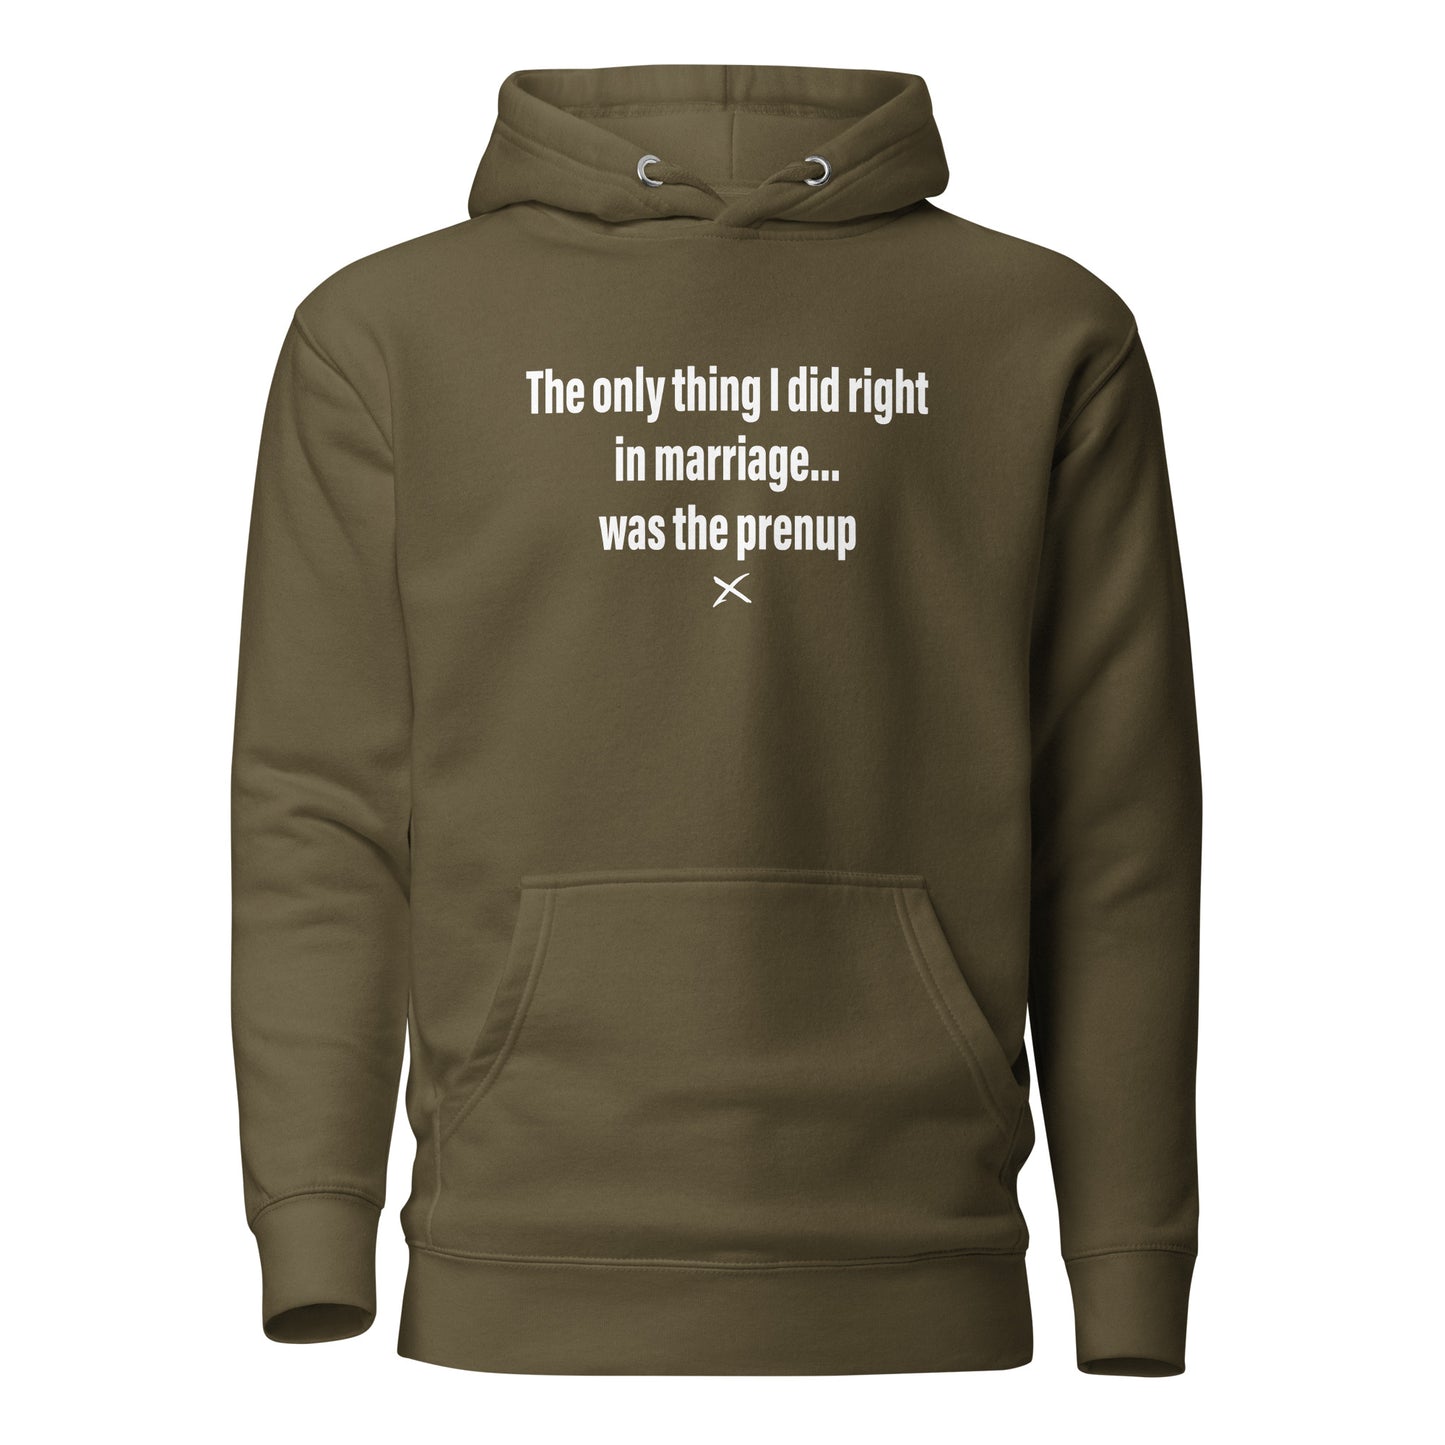 The only thing I did right in marriage... was the prenup - Hoodie